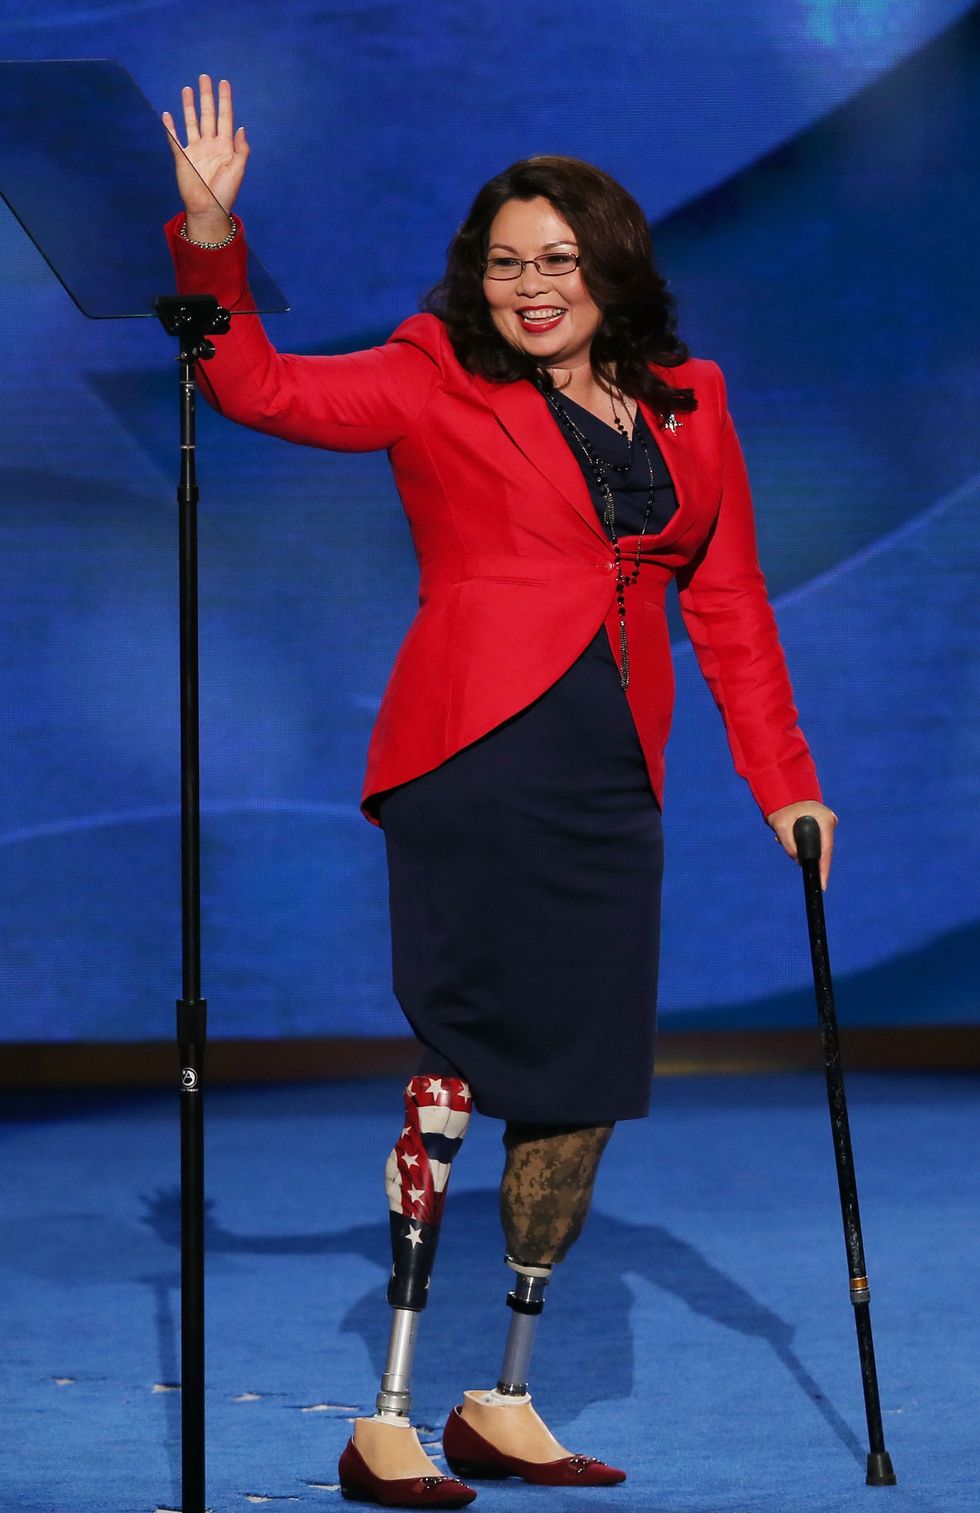 <p>Yet another history making senator-elect: Duckworth will be the <a href="http://www.cosmopolitan.com/politics/a8245262/tammy-duckworth-elected-illinois-senate/" target="_blank" data-tracking-id="recirc-text-link">first Thai American woman</a> to serve in the Senate. Duckworth, a Democrat, is a <a href="http://duckworth.house.gov/index.php/about-tammy/biography" target="_blank" data-tracking-id="recirc-text-link">veteran of the Iraq War and in November 2004</a>, she lost her legs and partial use of her right arm when her helicopter was hit by a rocket-propelled grenade. She spent a year in recovery and was awarded a Purple Heart for her service. Duckworth has worked tirelessly on behalf of veterans affairs, including <a href="http://duckworth.house.gov/index.php/issues/veterans-affairs" target="_blank" data-tracking-id="recirc-text-link">creating a 24-hour crisis hotline</a> for veterans.</p>